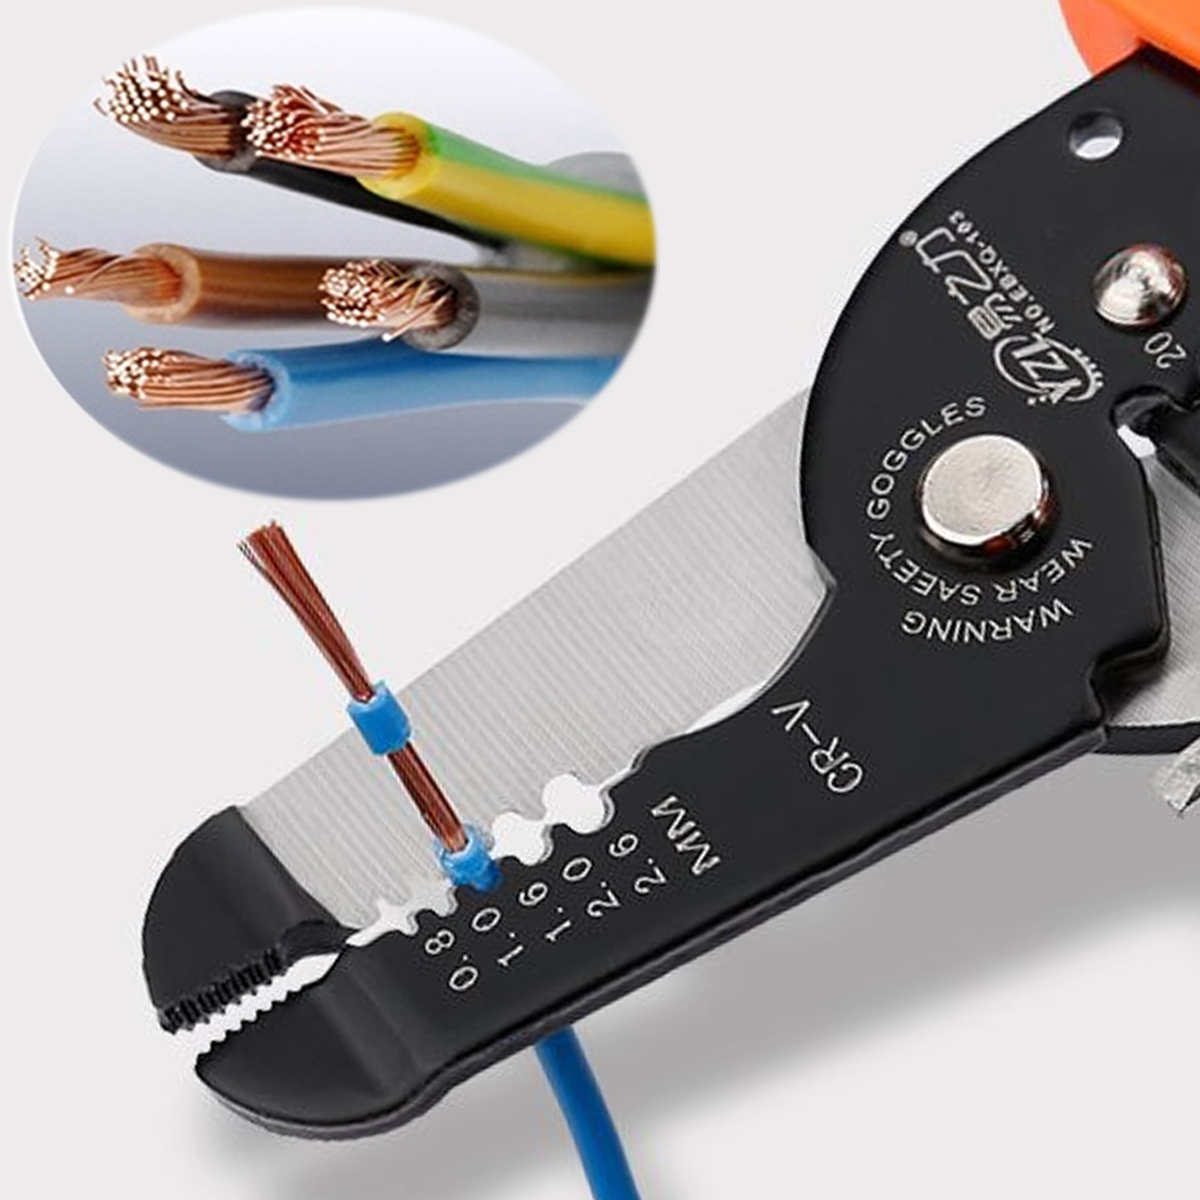 02-6mm-Multifunctional-Cable-Crimper-Cutter-Stripper-Decrustation-Wire-Pliers-1612405-9